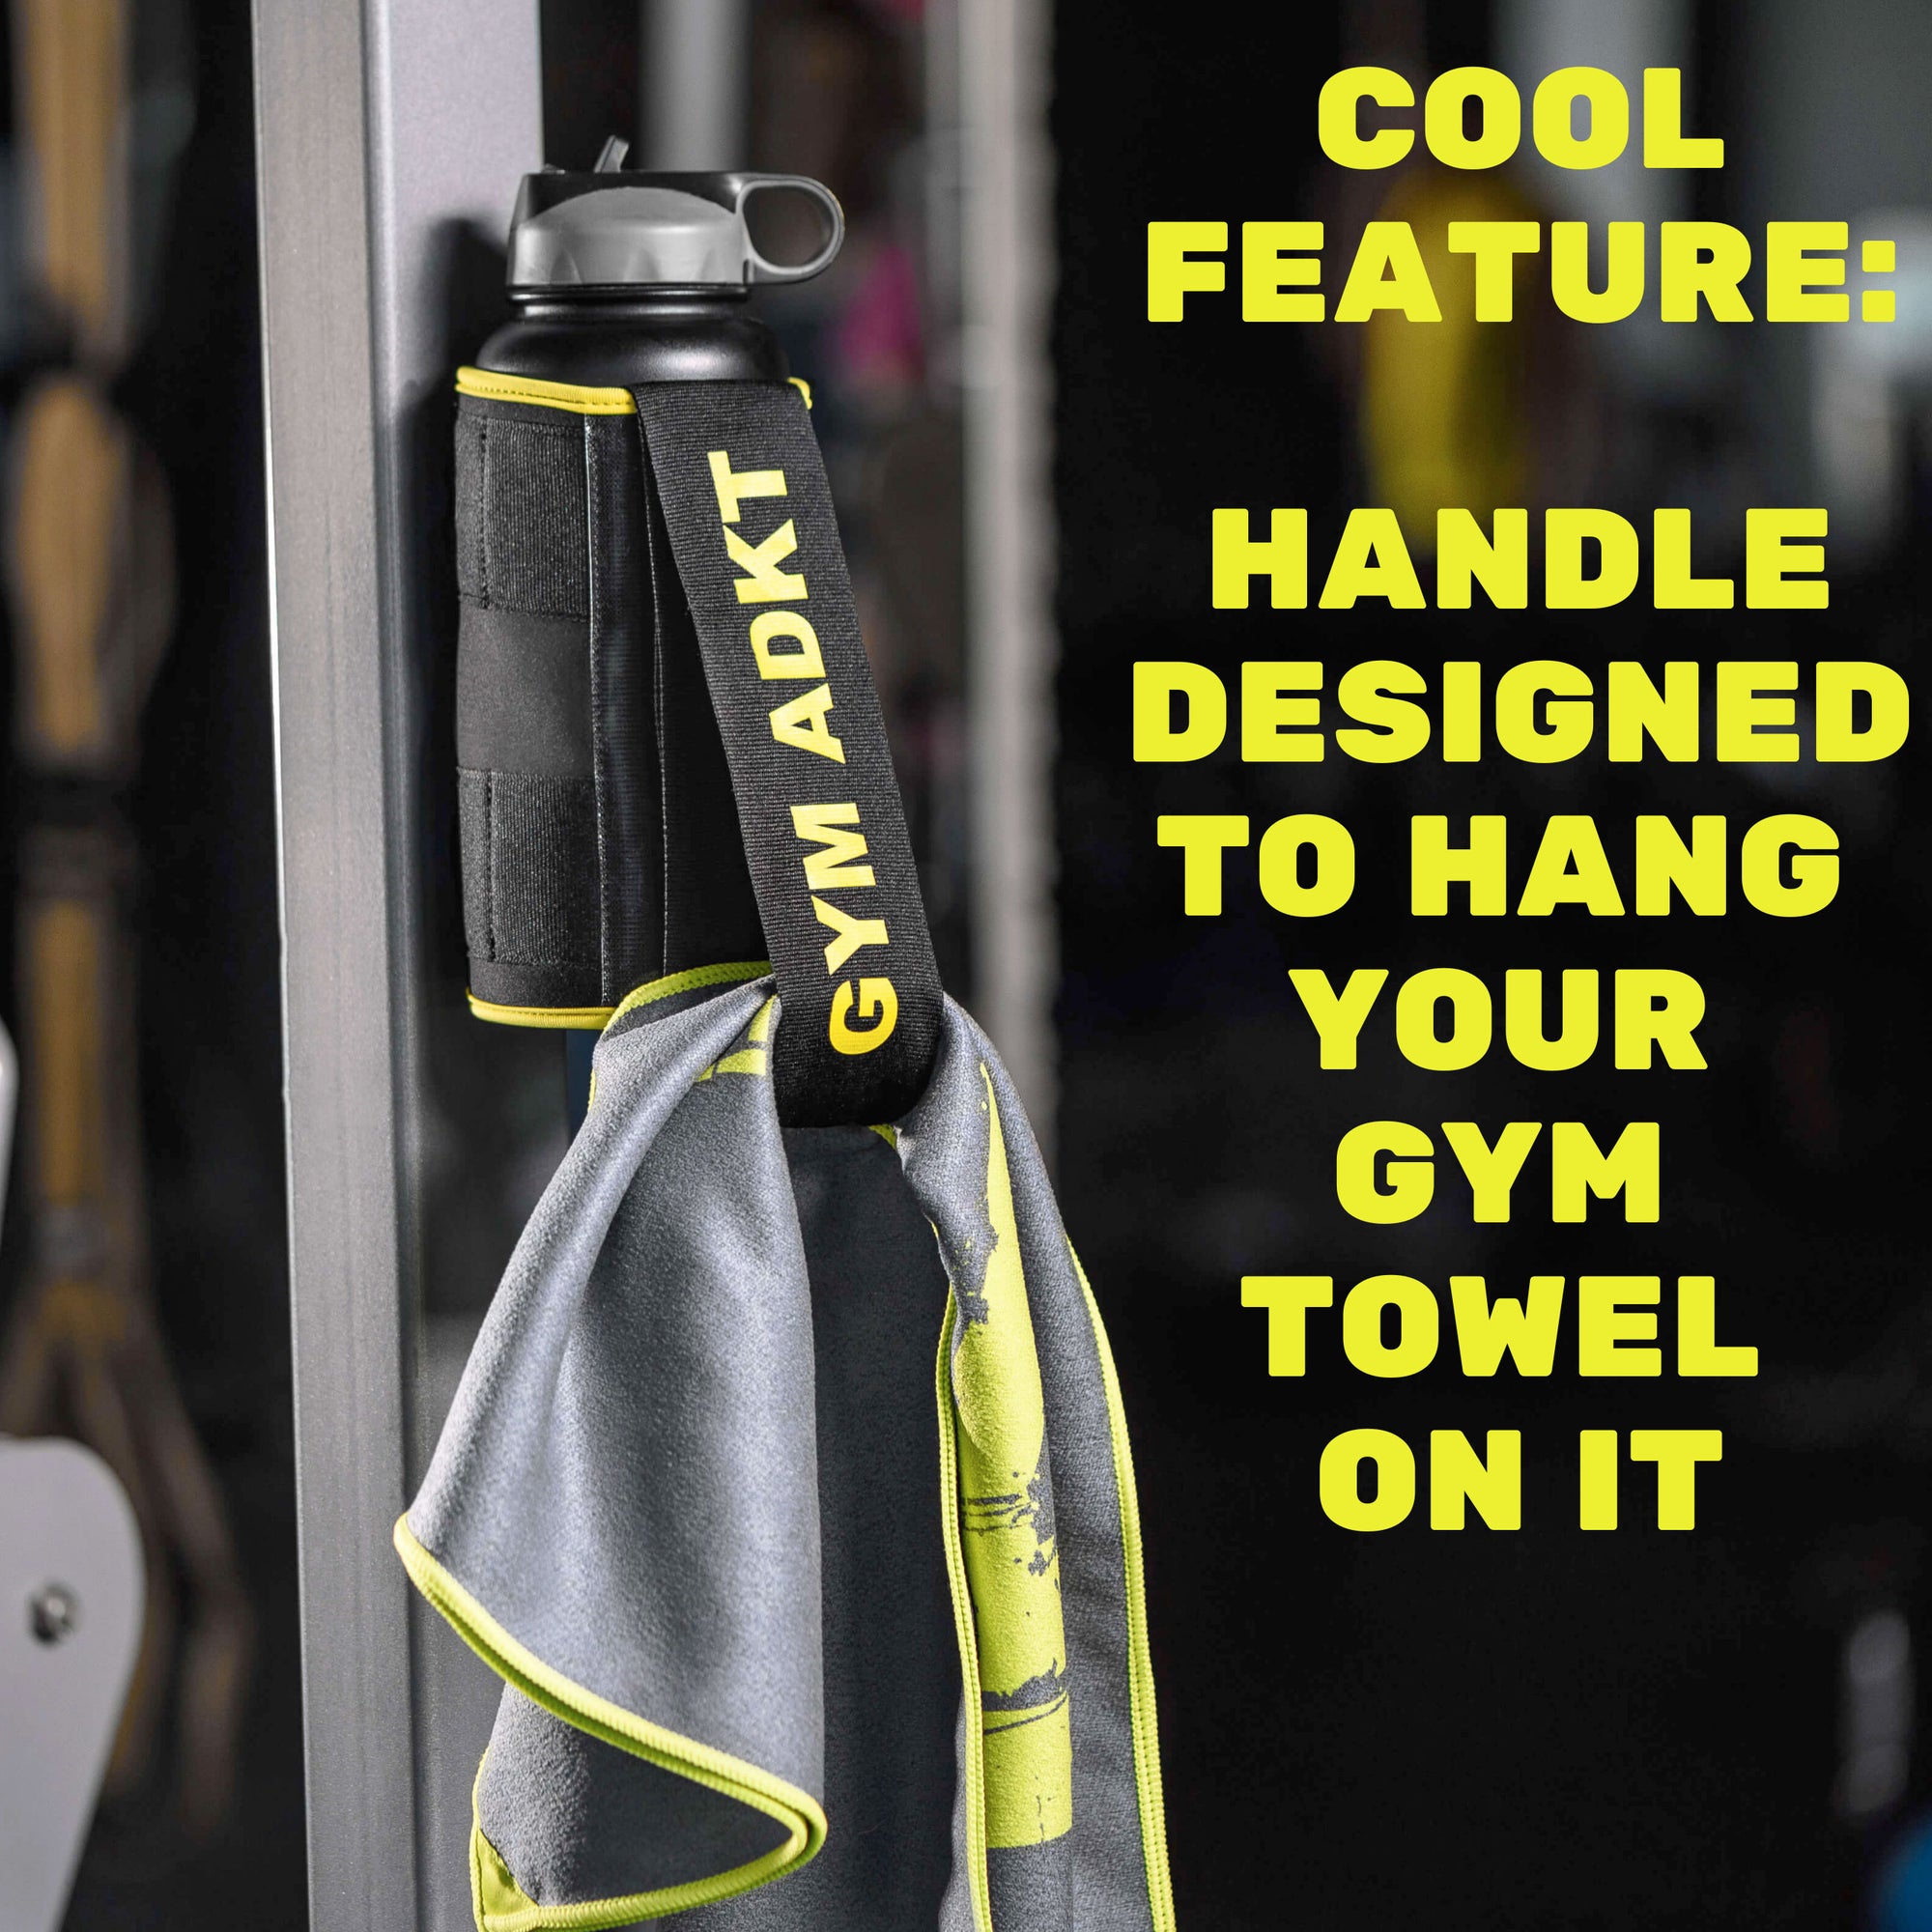 At the gym or on the go use the Magnetic Bottle Bag to attach to any s